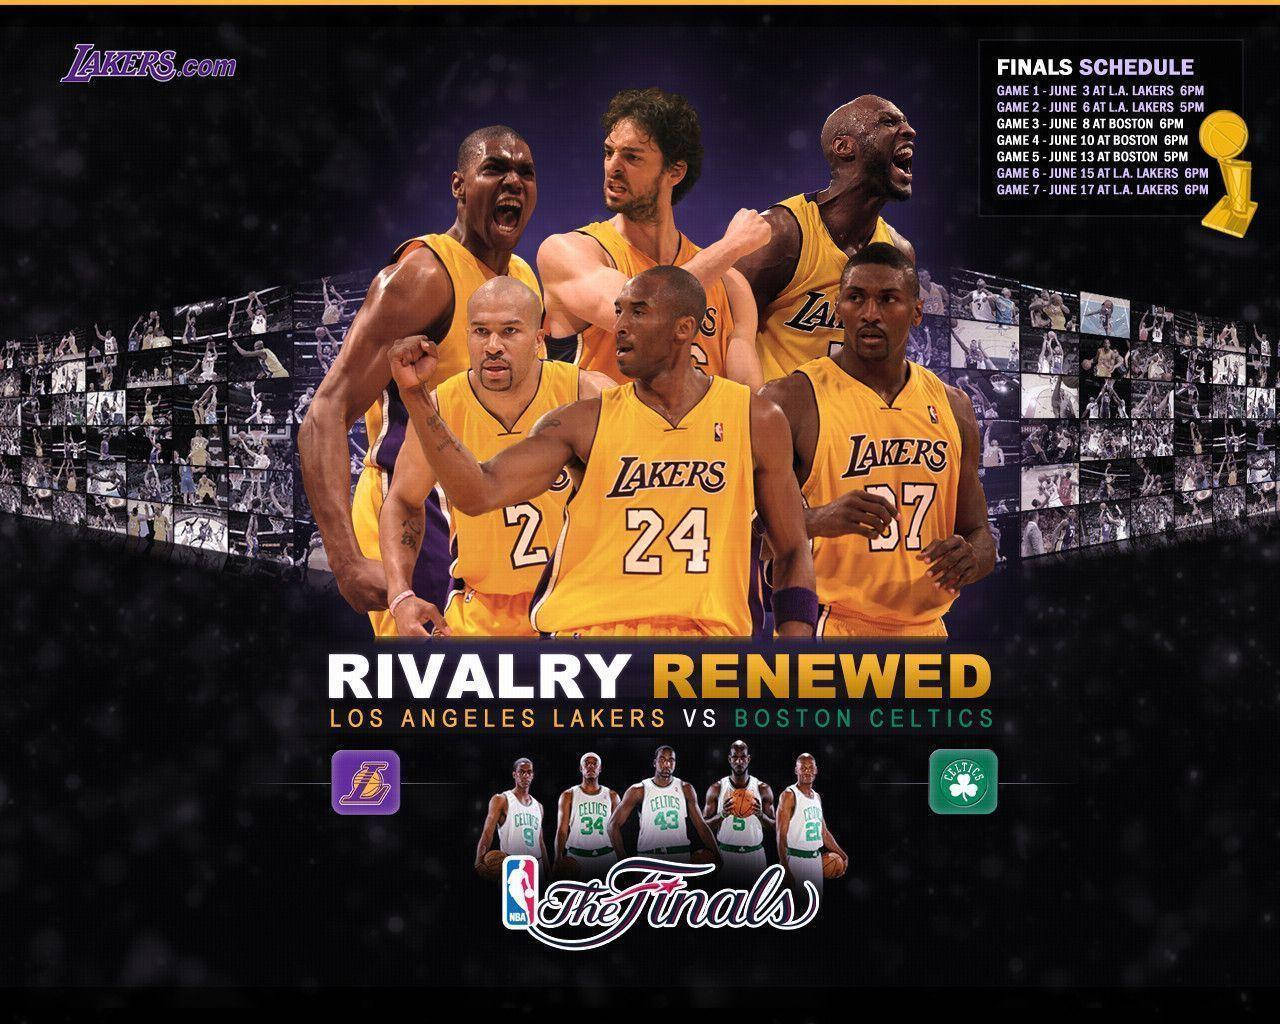 Los Angeles Lakers Rivalry Renewed Background